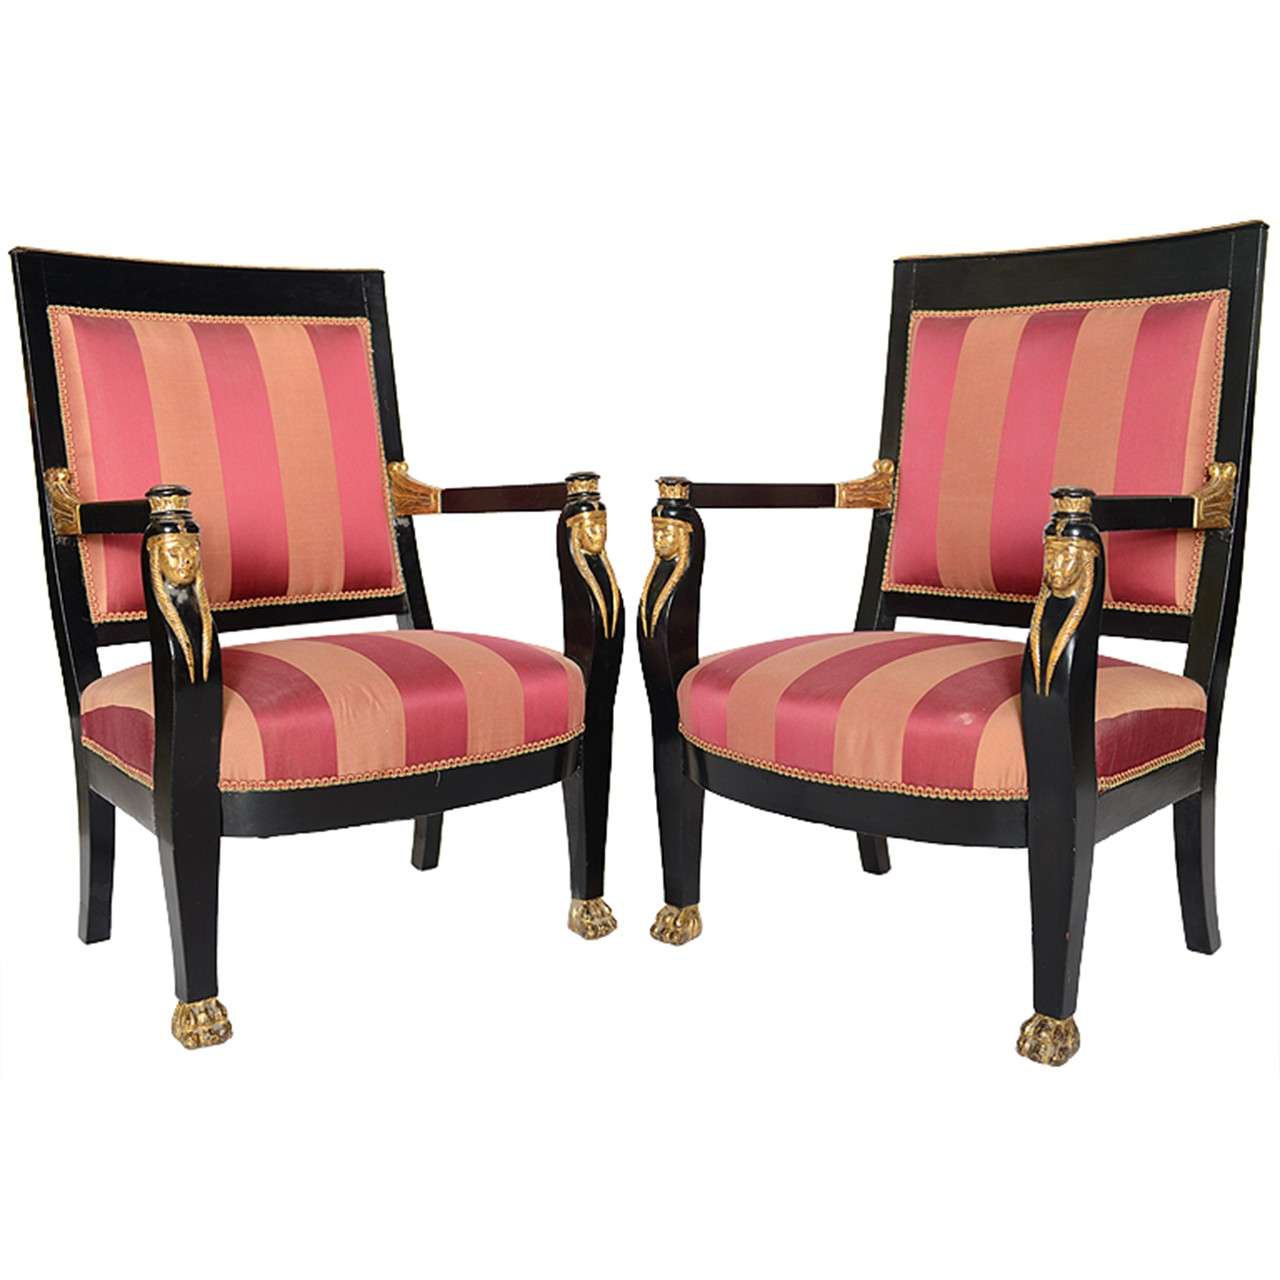 Pair of Italian Neoclassic Ebonized and Parcel-Gilt Armchairs For Sale